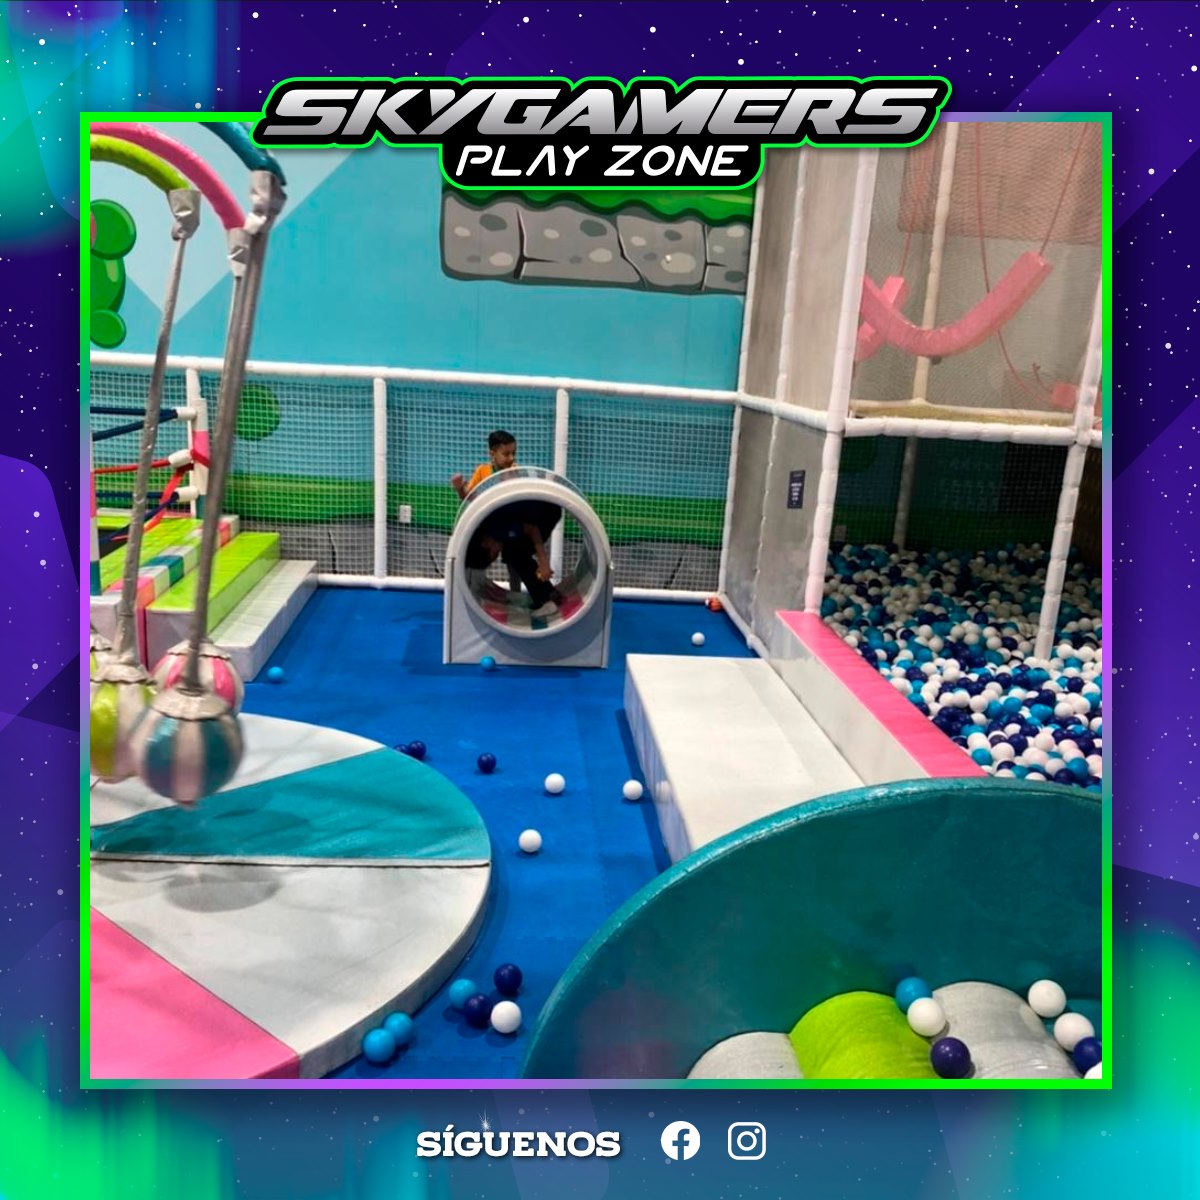 Skygamers Play Zone pabellon